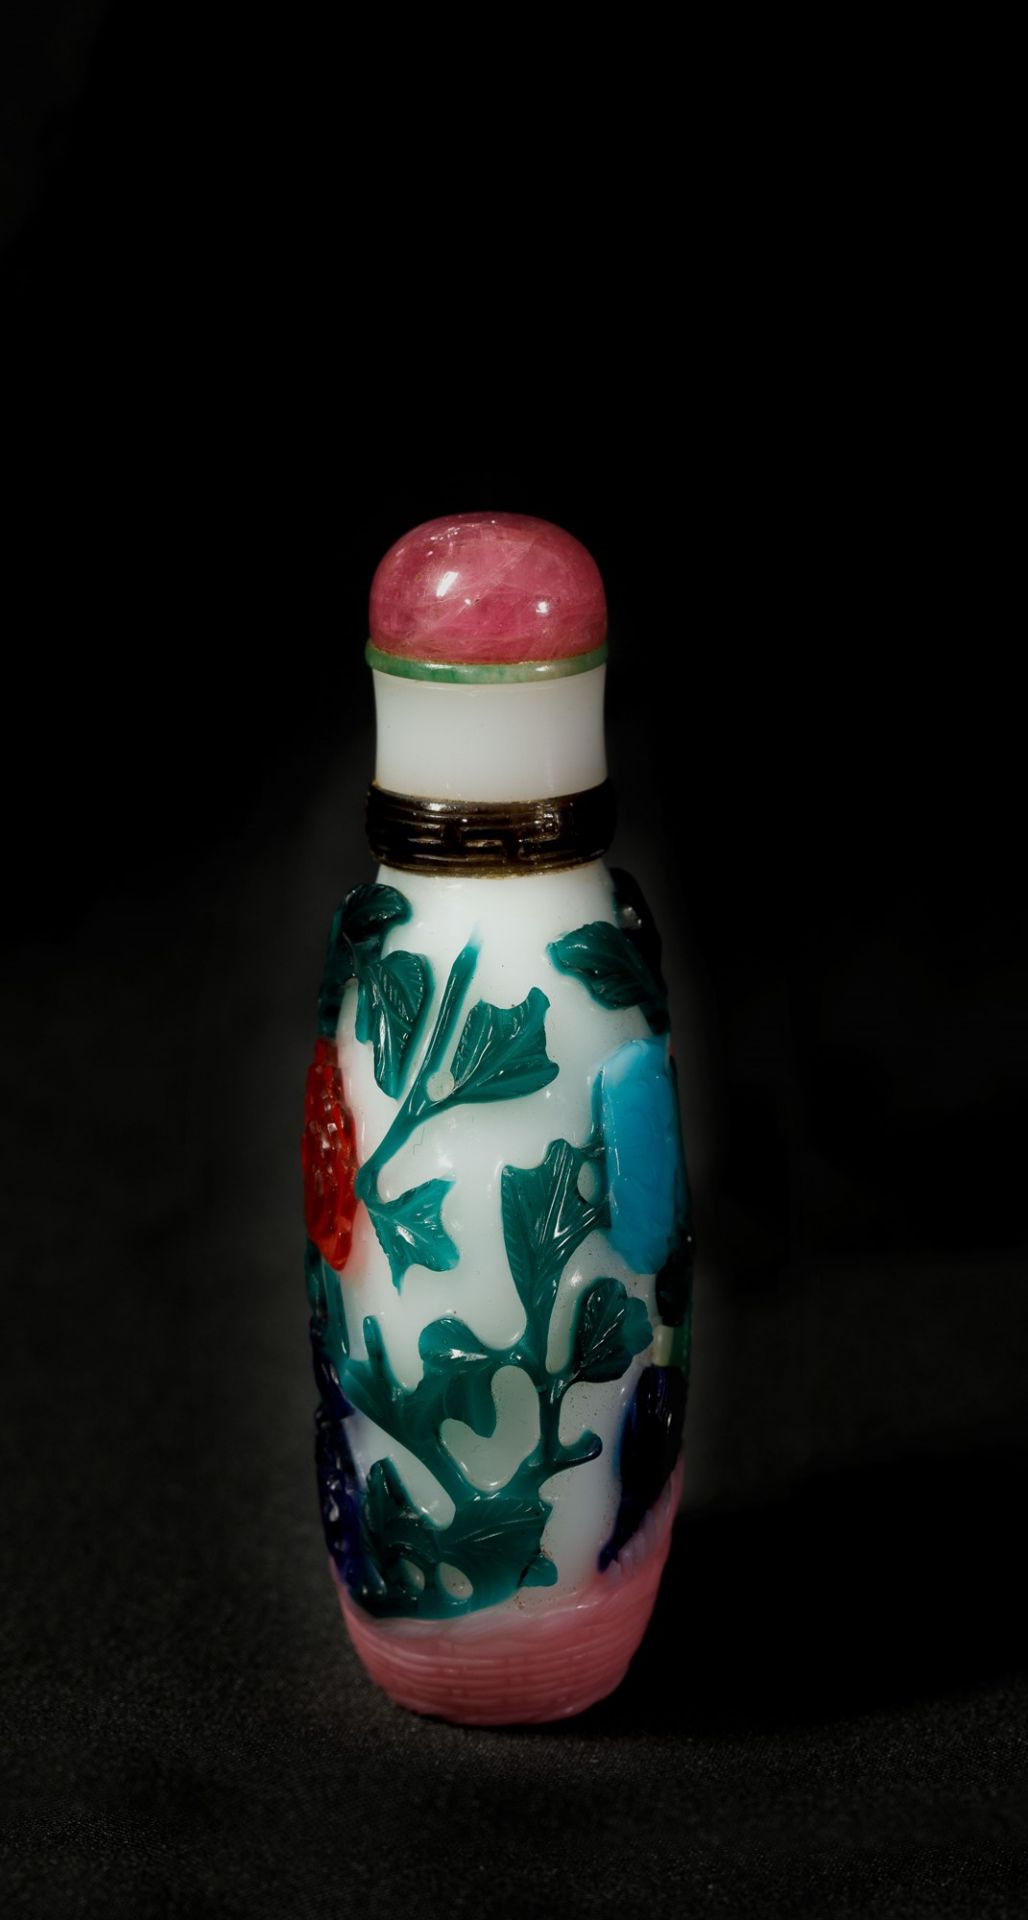 A RARE SEVEN COLOUR GLASS OVERLAY SNUFF BOTTLE h. 8 cm - Image 3 of 5